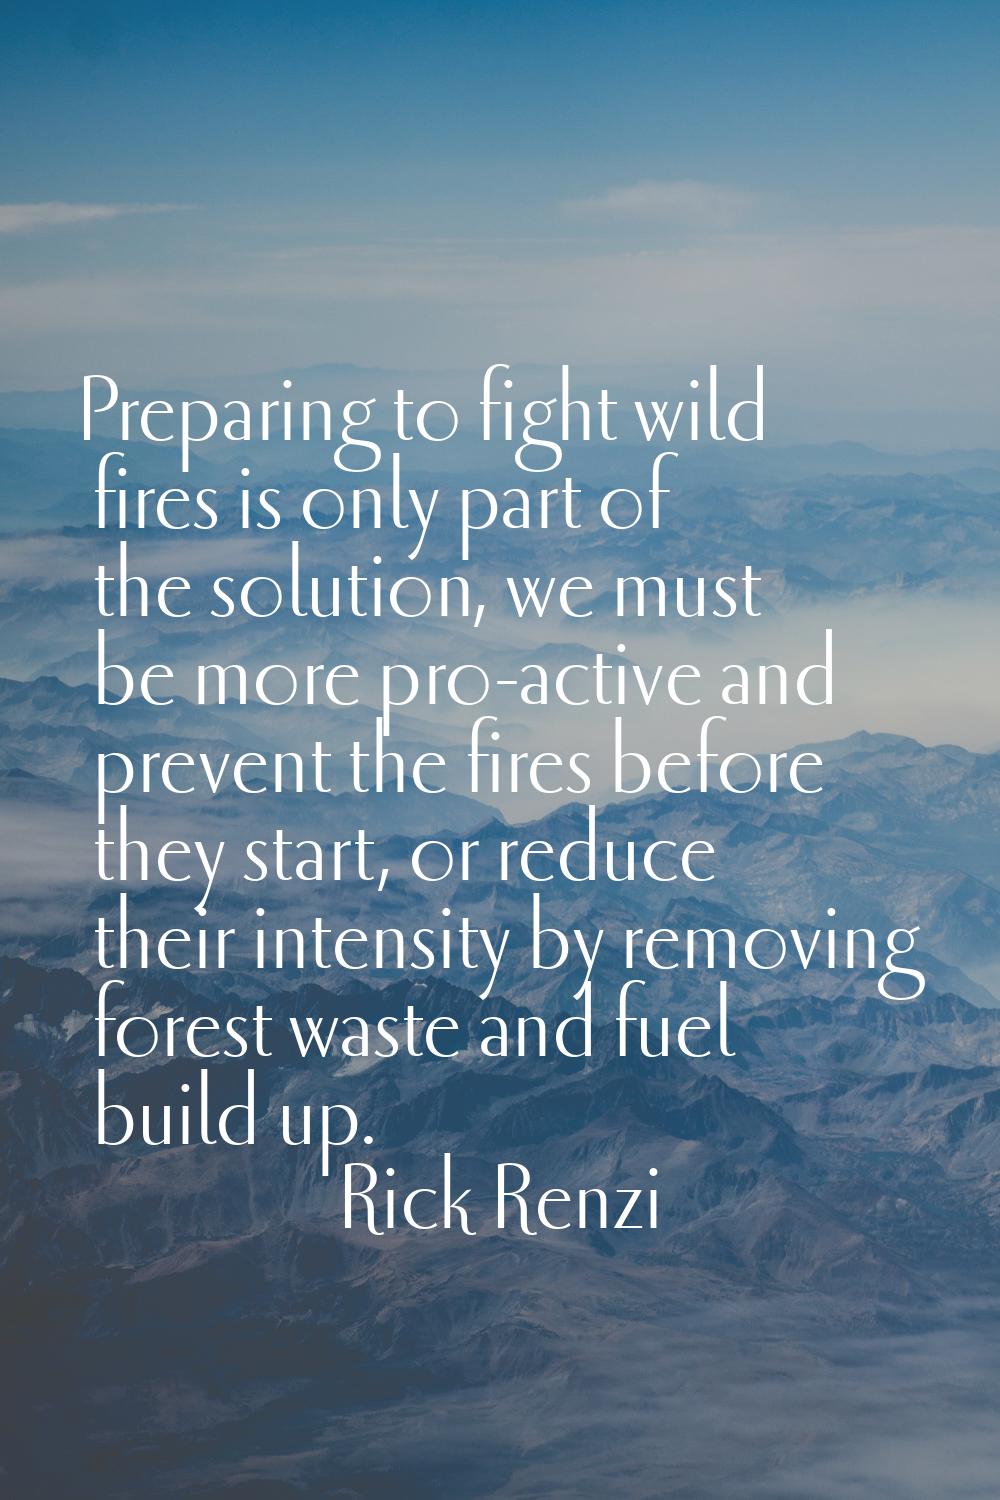 Preparing to fight wild fires is only part of the solution, we must be more pro-active and prevent 